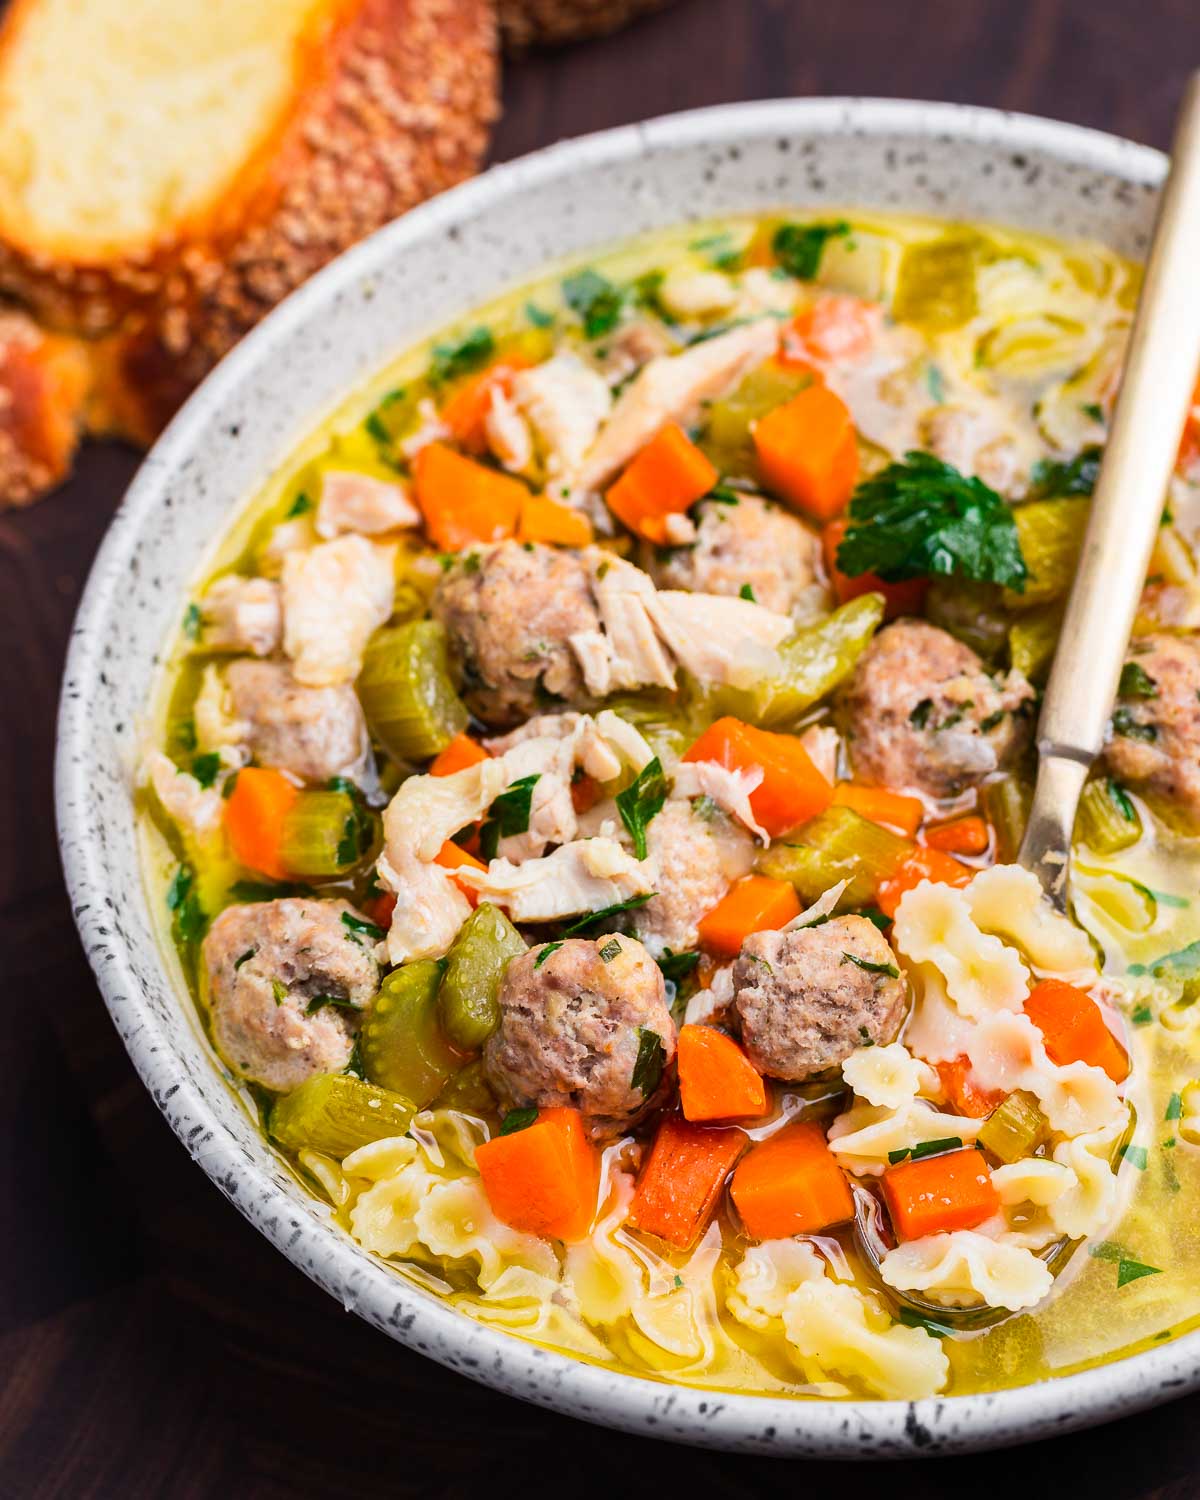 Chicken noodle soup with meatballs in white bowl on wooden board.